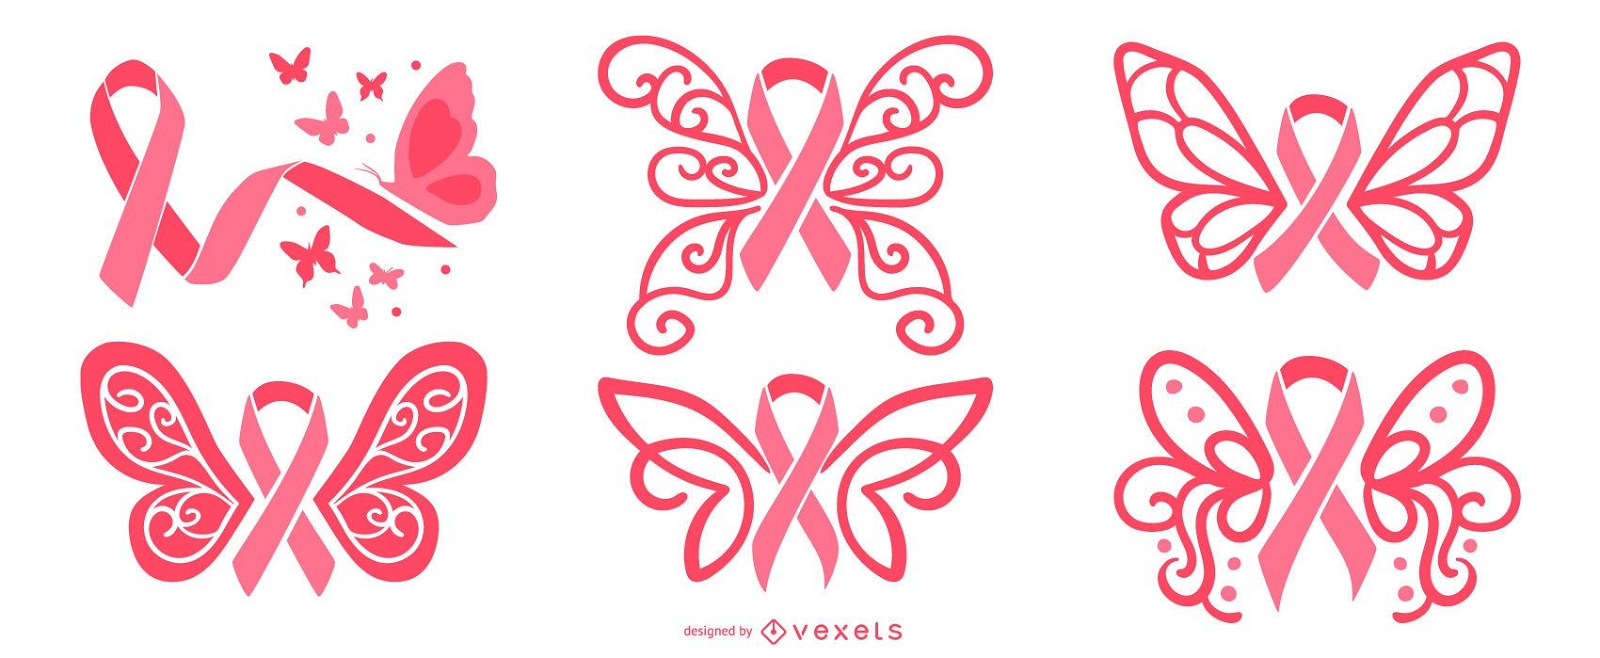 1. Butterfly Breast Cancer Ribbon Tattoo - wide 5